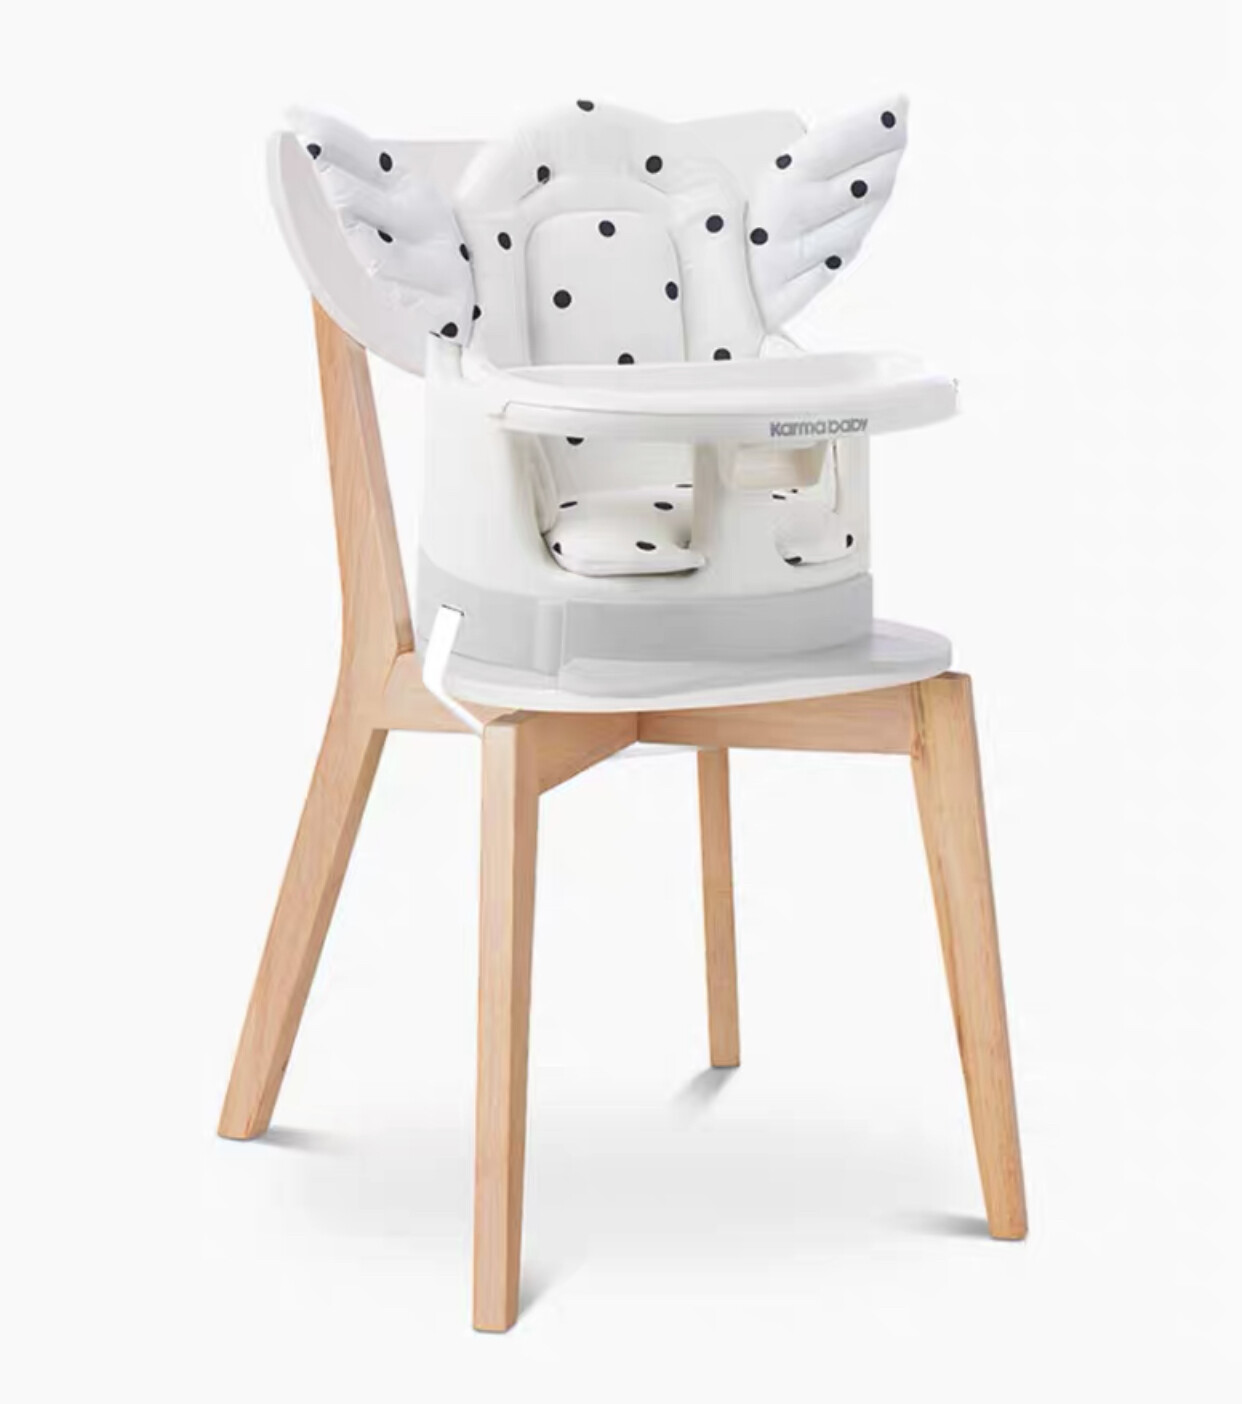 Baby Angel 3 in 1 Seat with Music Tray 6 months+ (Feeding Booster Seat/ Playtime Seat/ Wagon Seat)- White/ Grey/ Pink